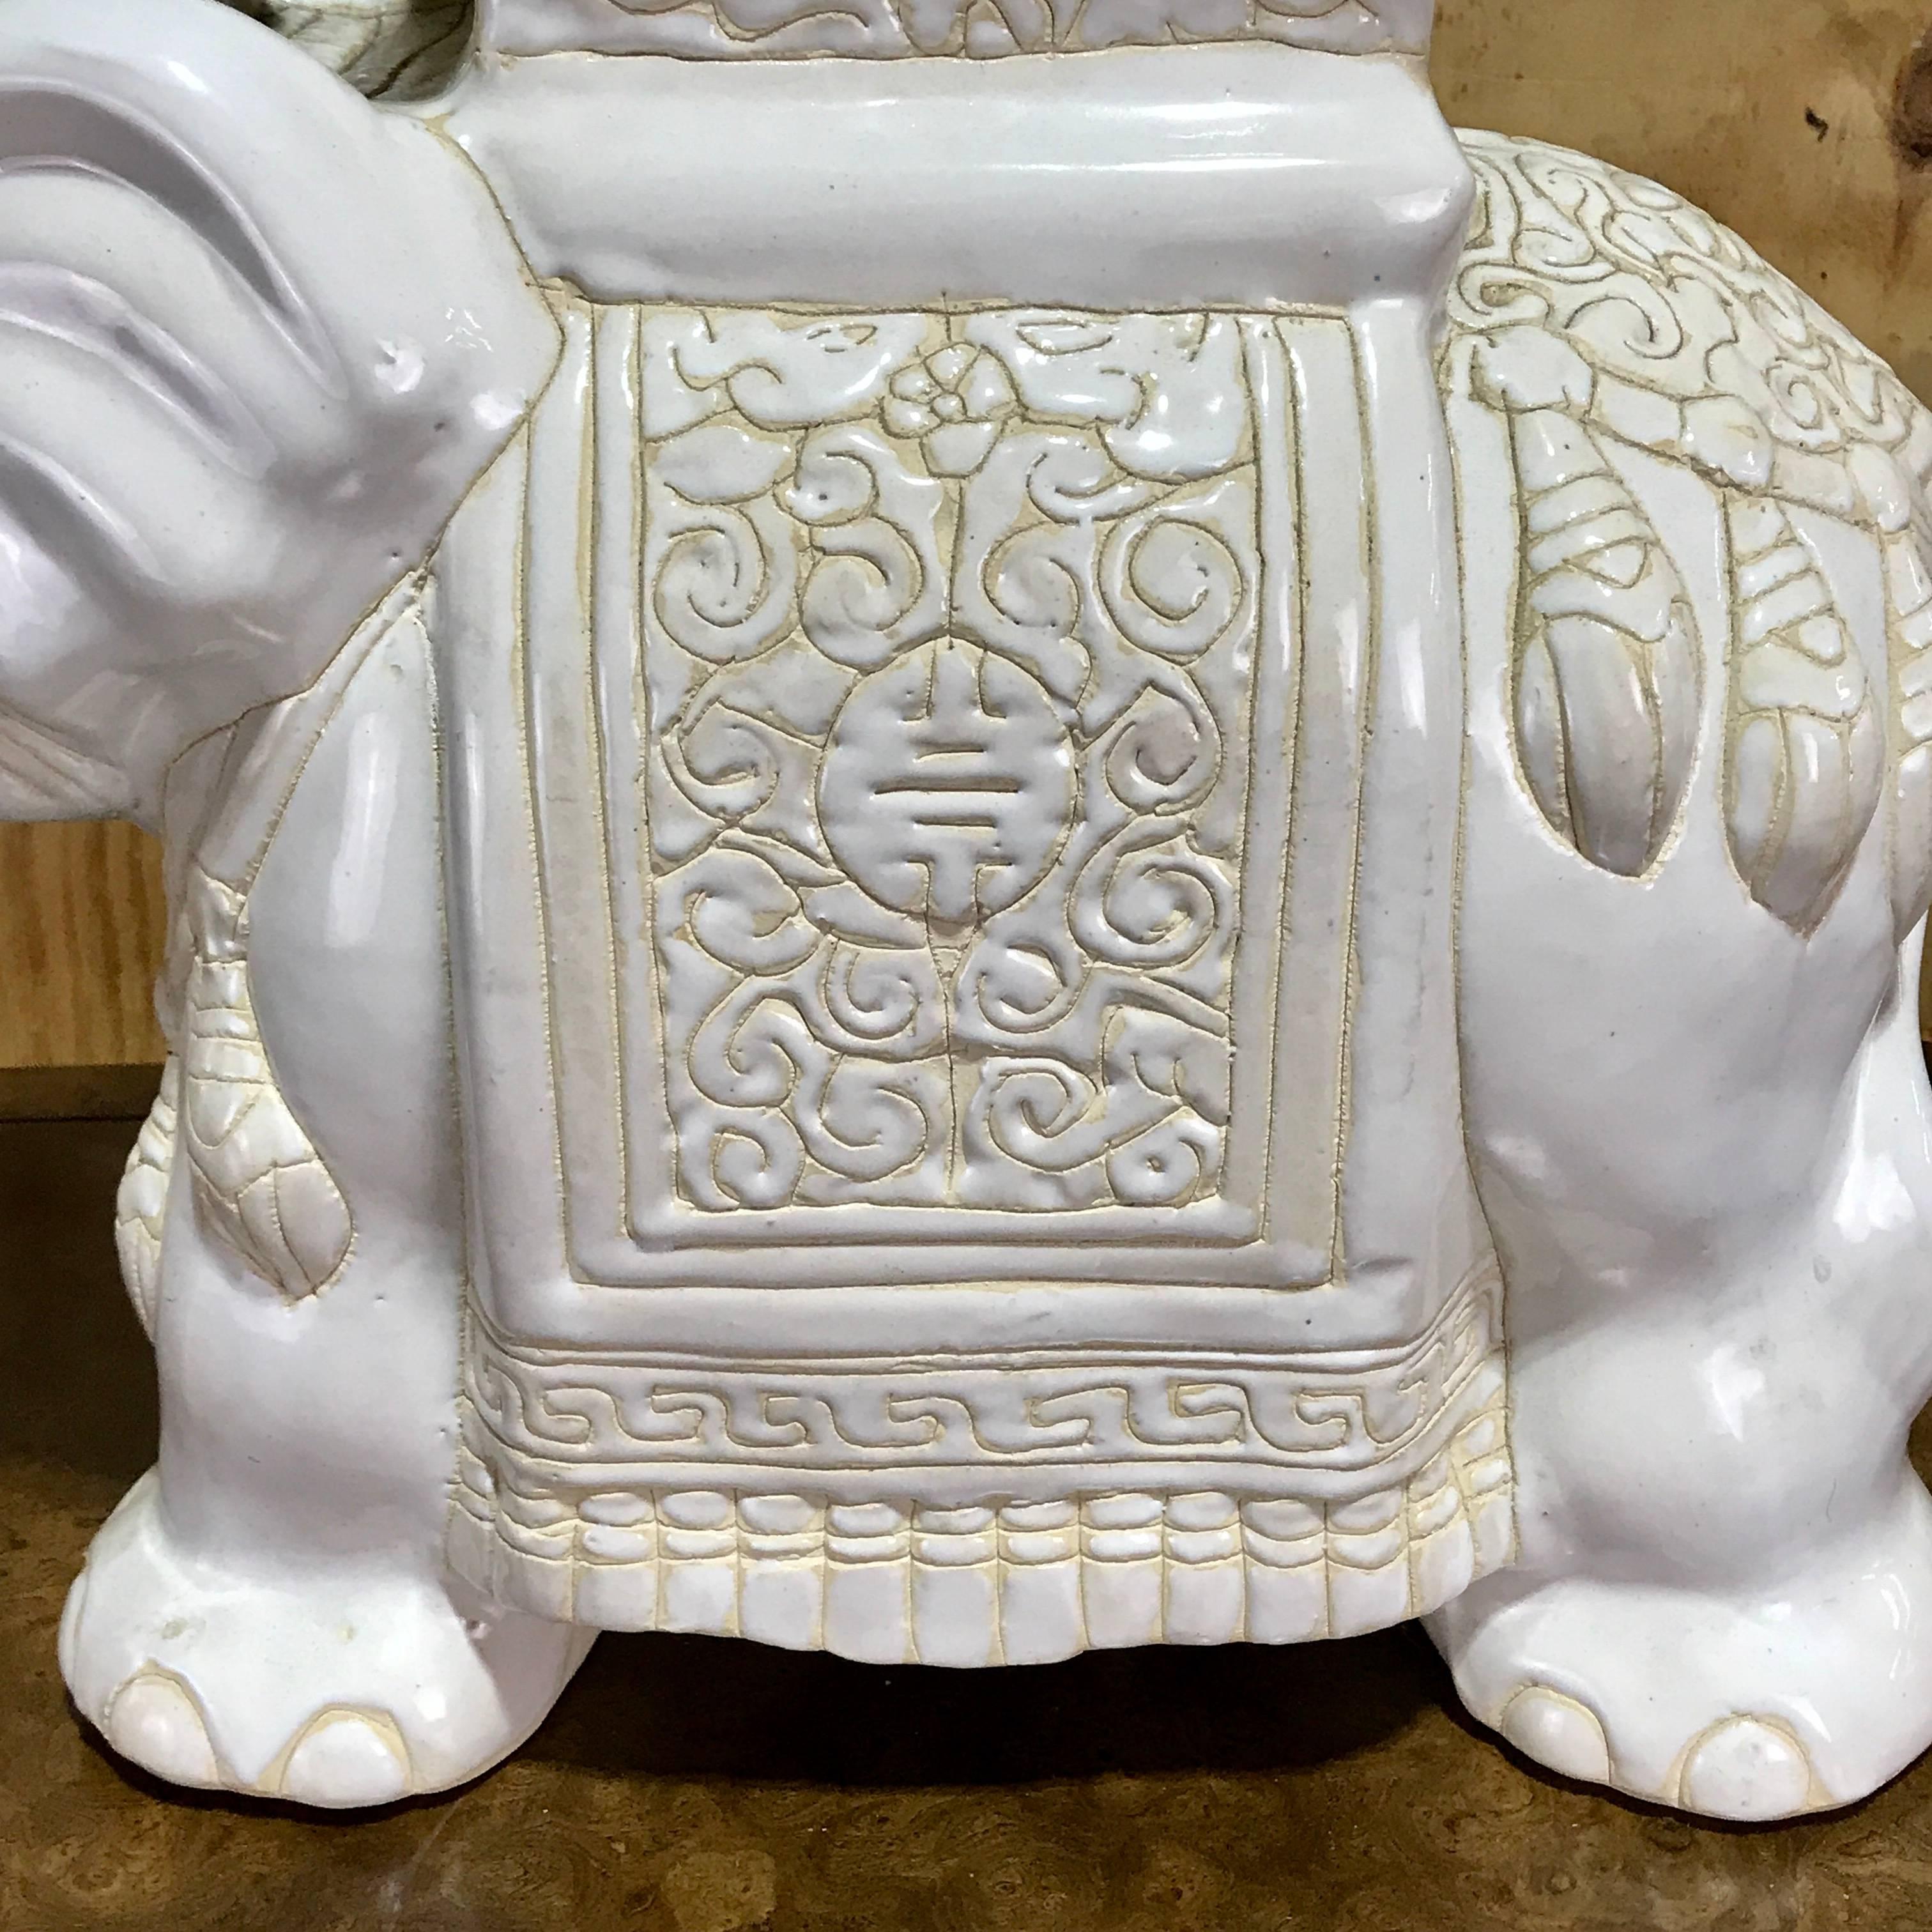 Midcentury porcelain standing elephant garden seat, in white and yellow. Standing 21